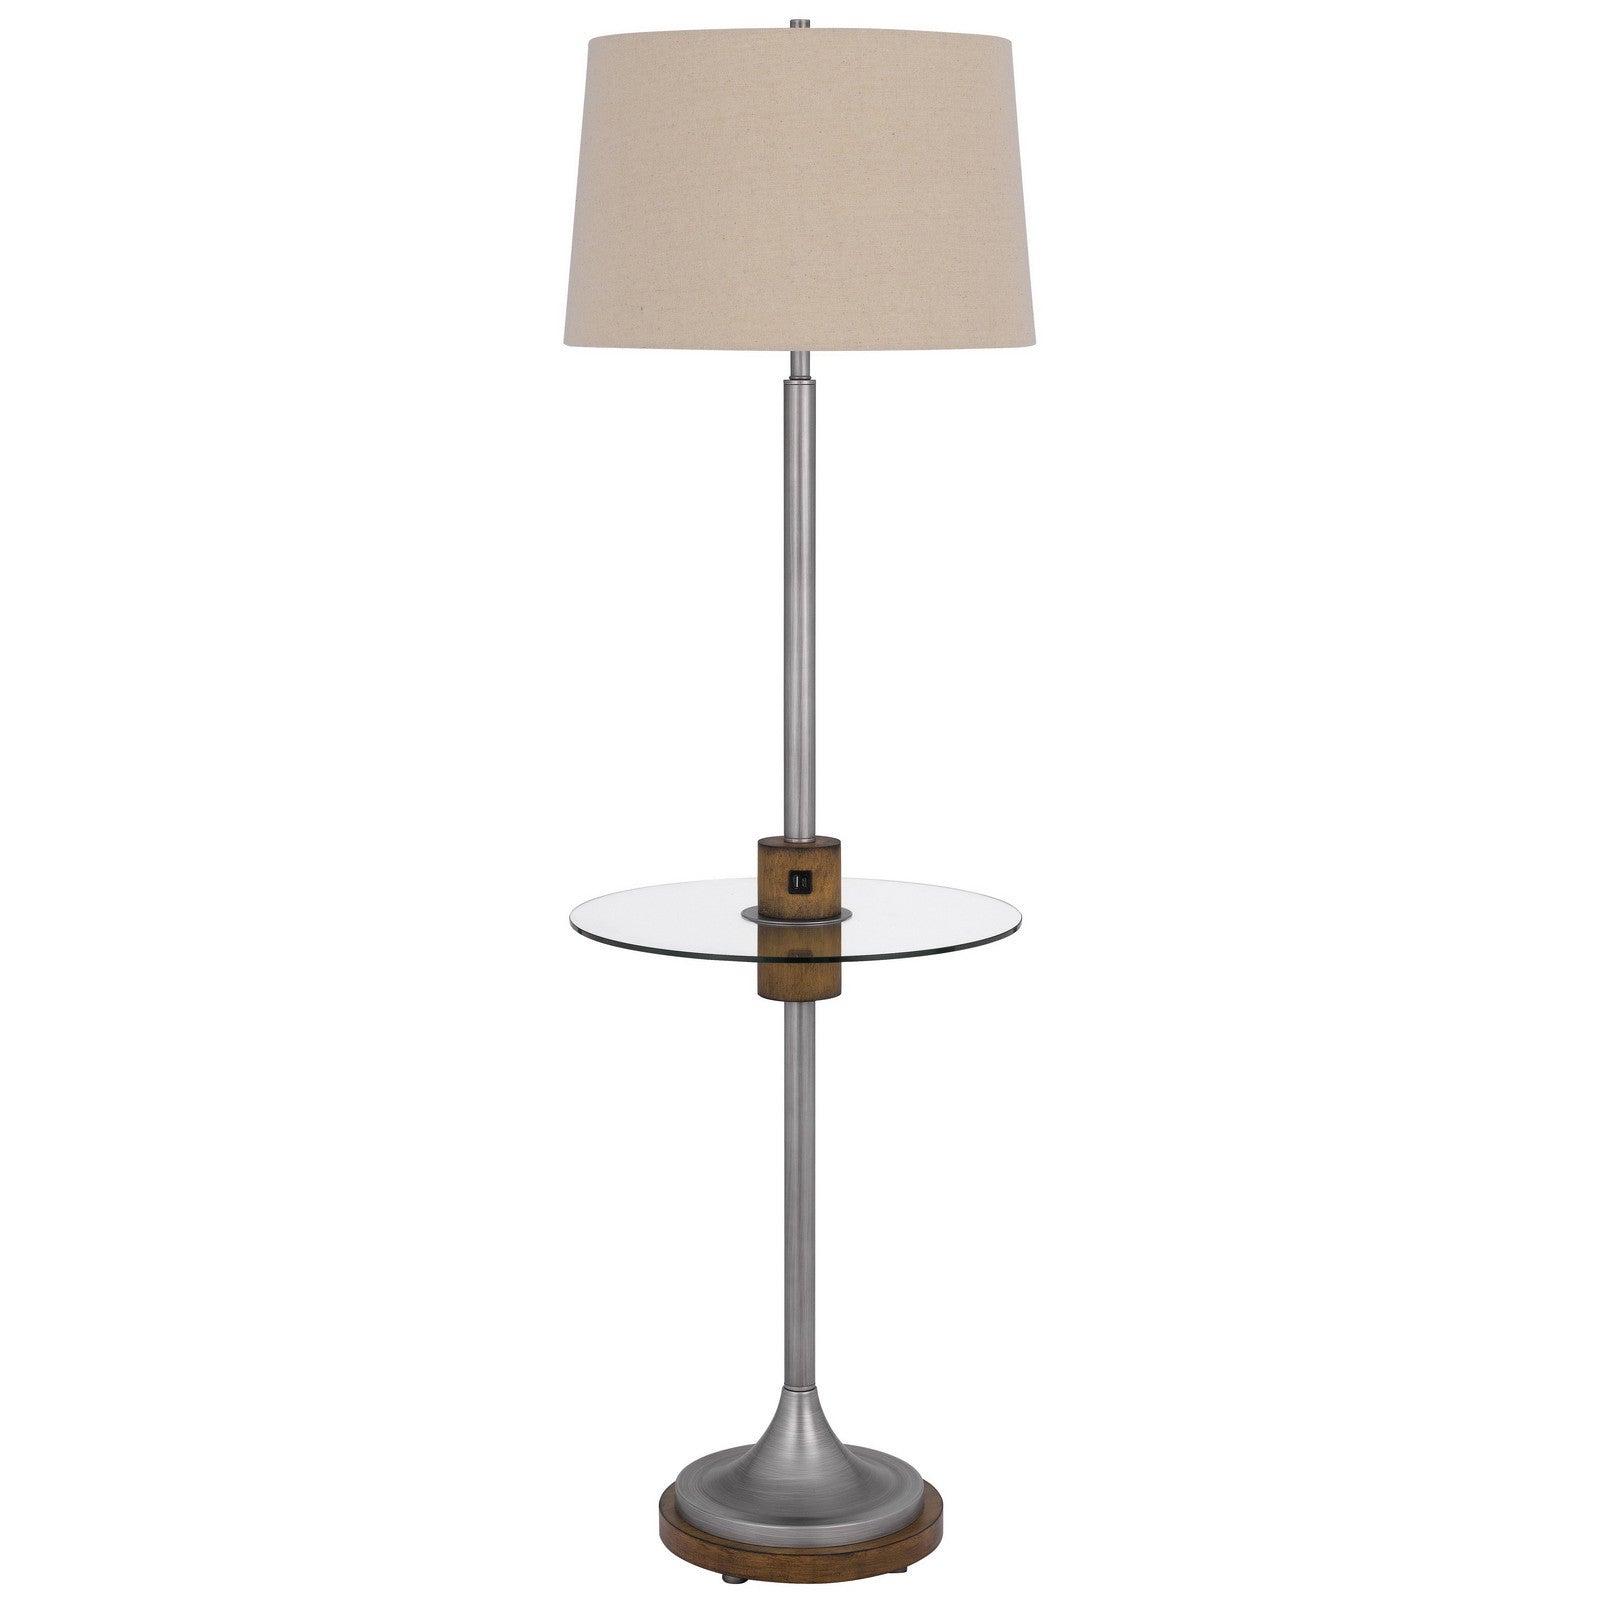 61" Pewter Tray Table Floor Lamp With Beige Transparent Glass Square Shade